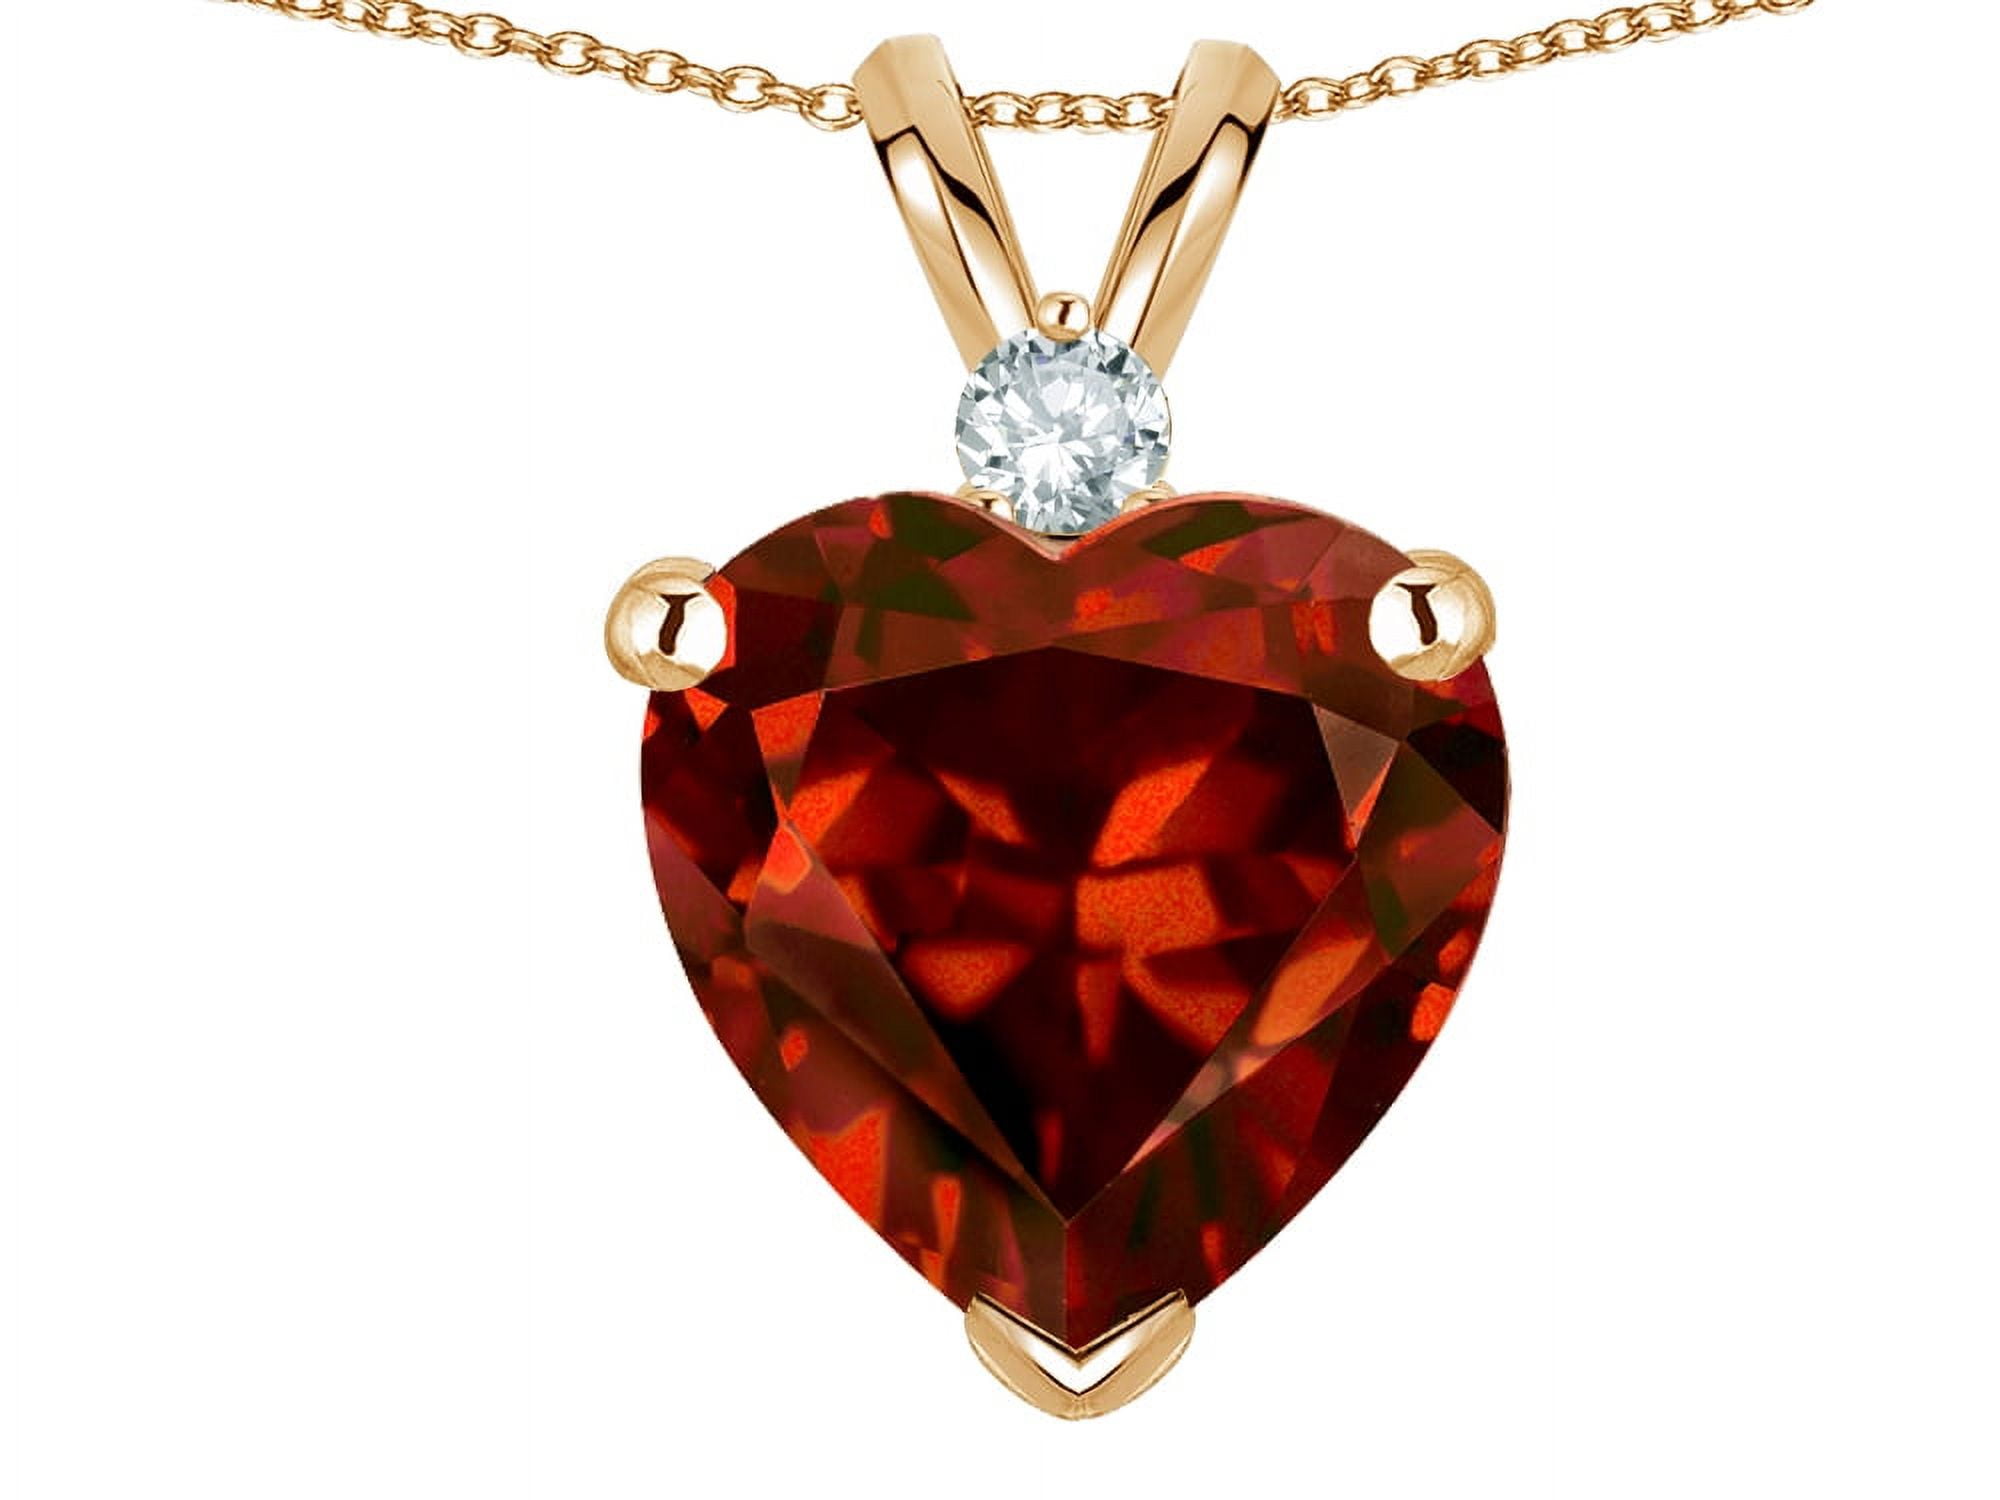 Heart Shaped Garnet Pendant Necklace 1.15ct in 9ct Gold | QP Jewellers